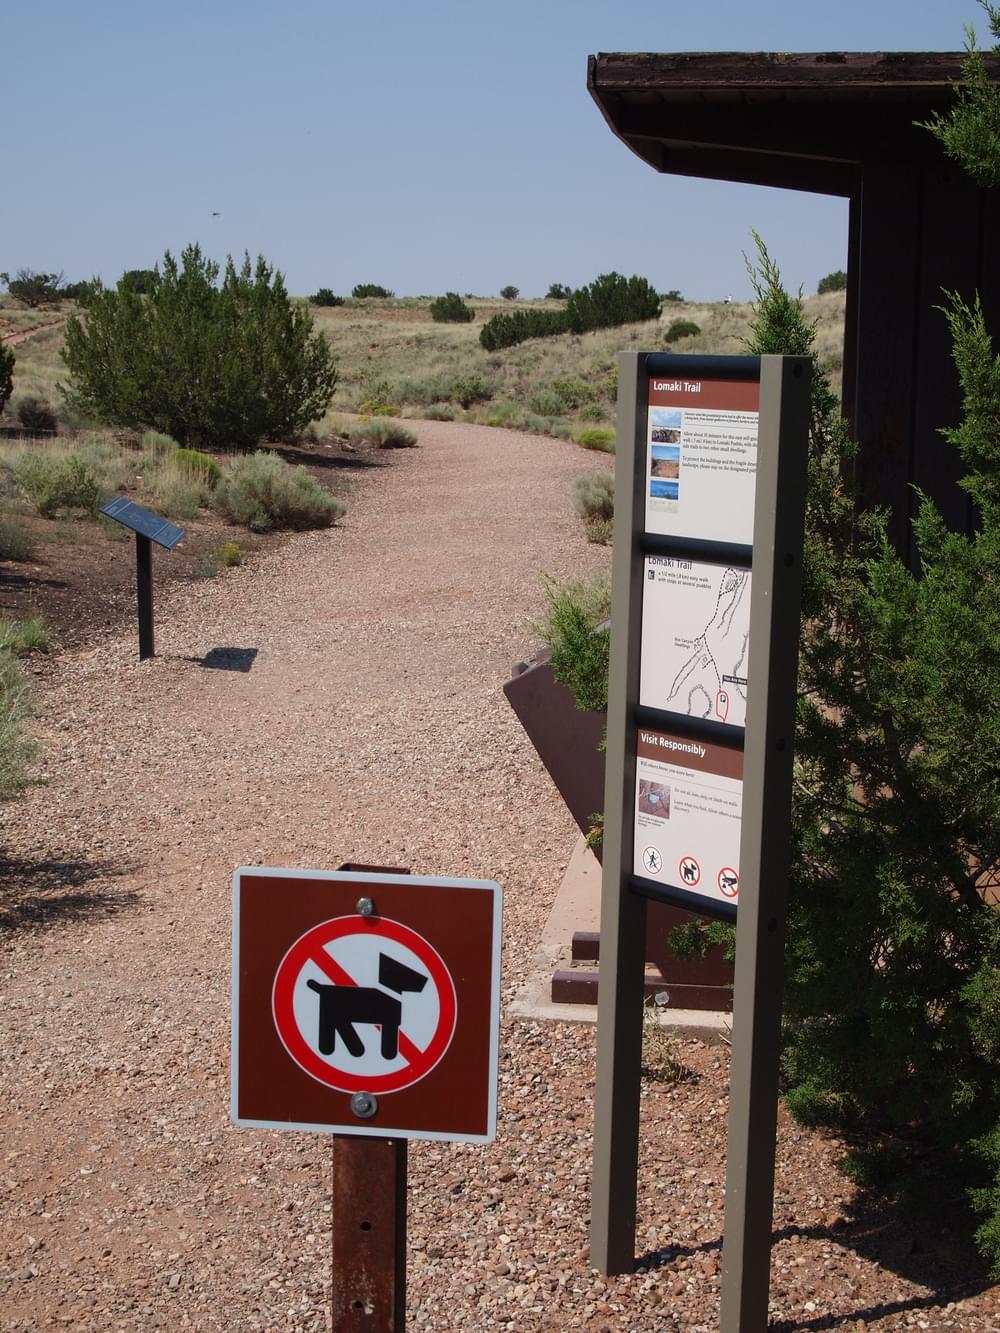 Lomaki Wupatki National Monument in Arizona prohibits dogs on a trail to Indian ruins